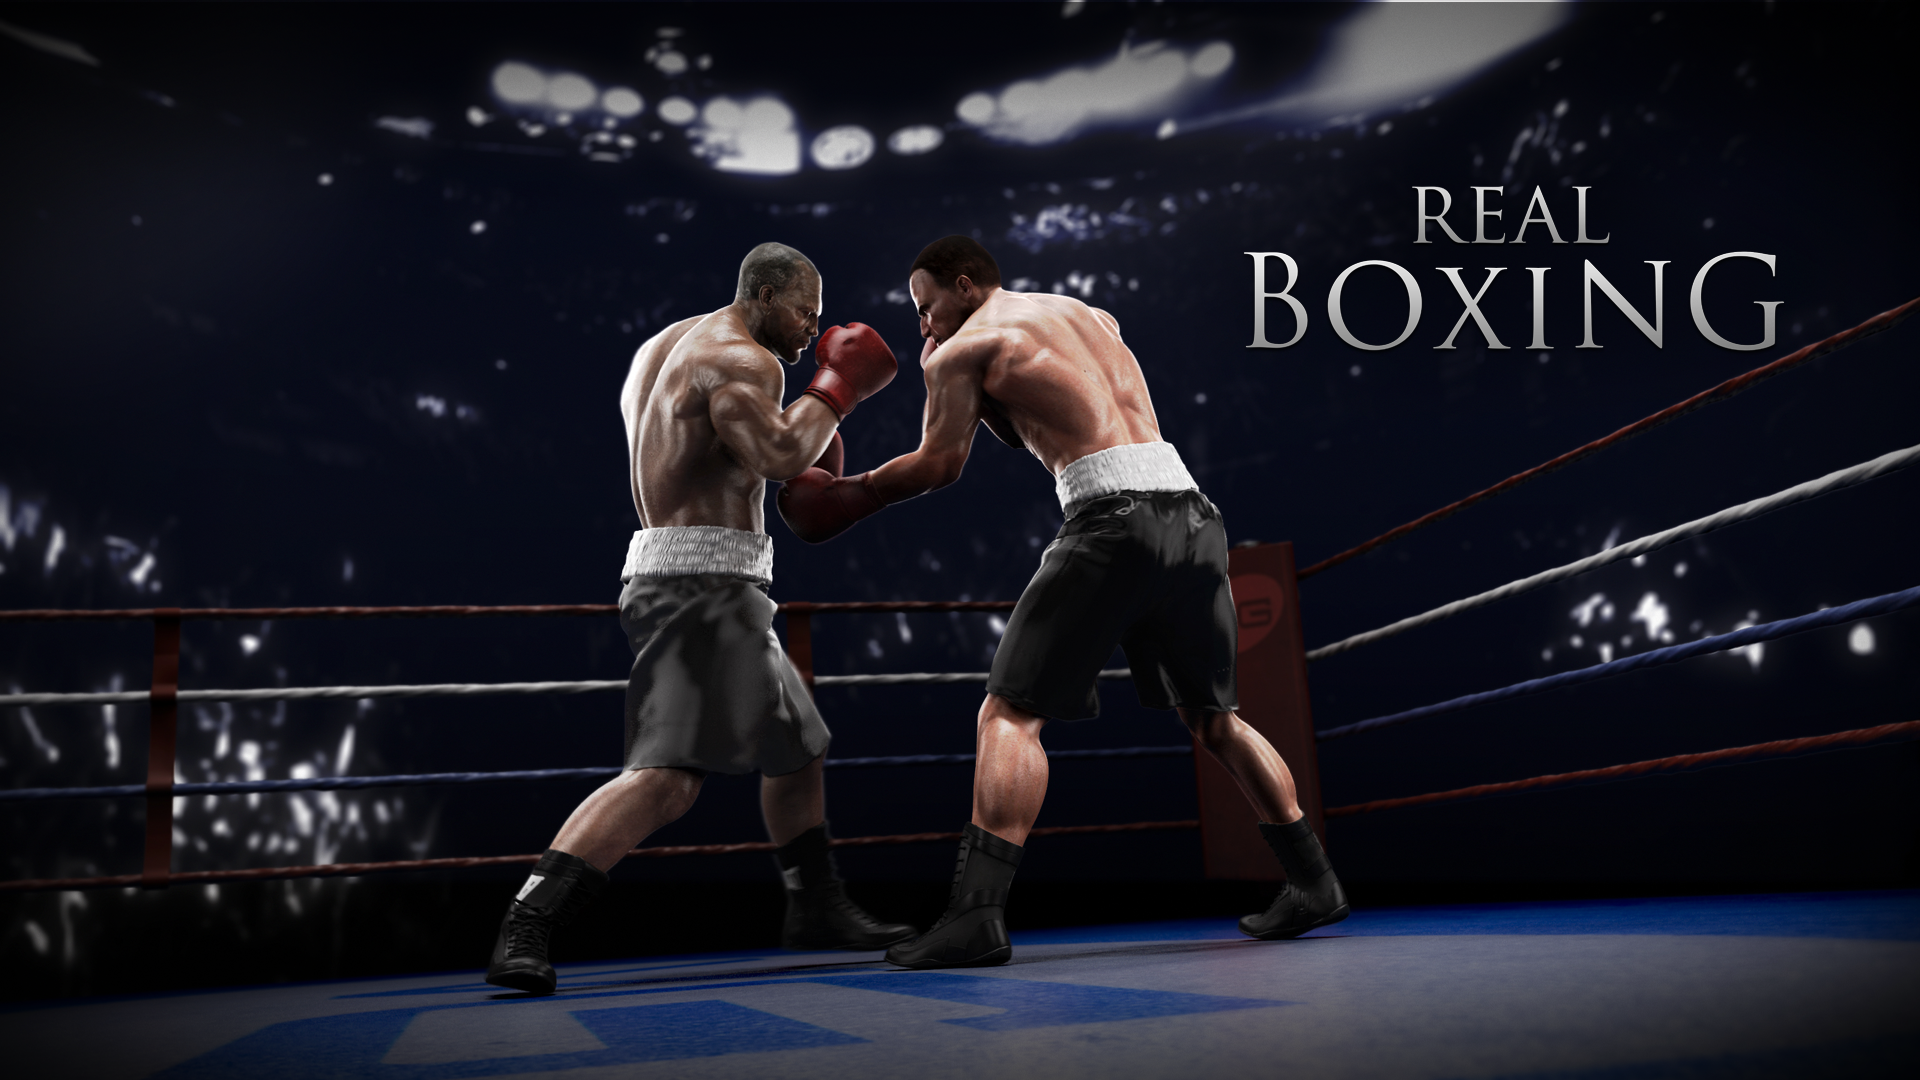 Boxing Wallpapers High Quality | Download Free